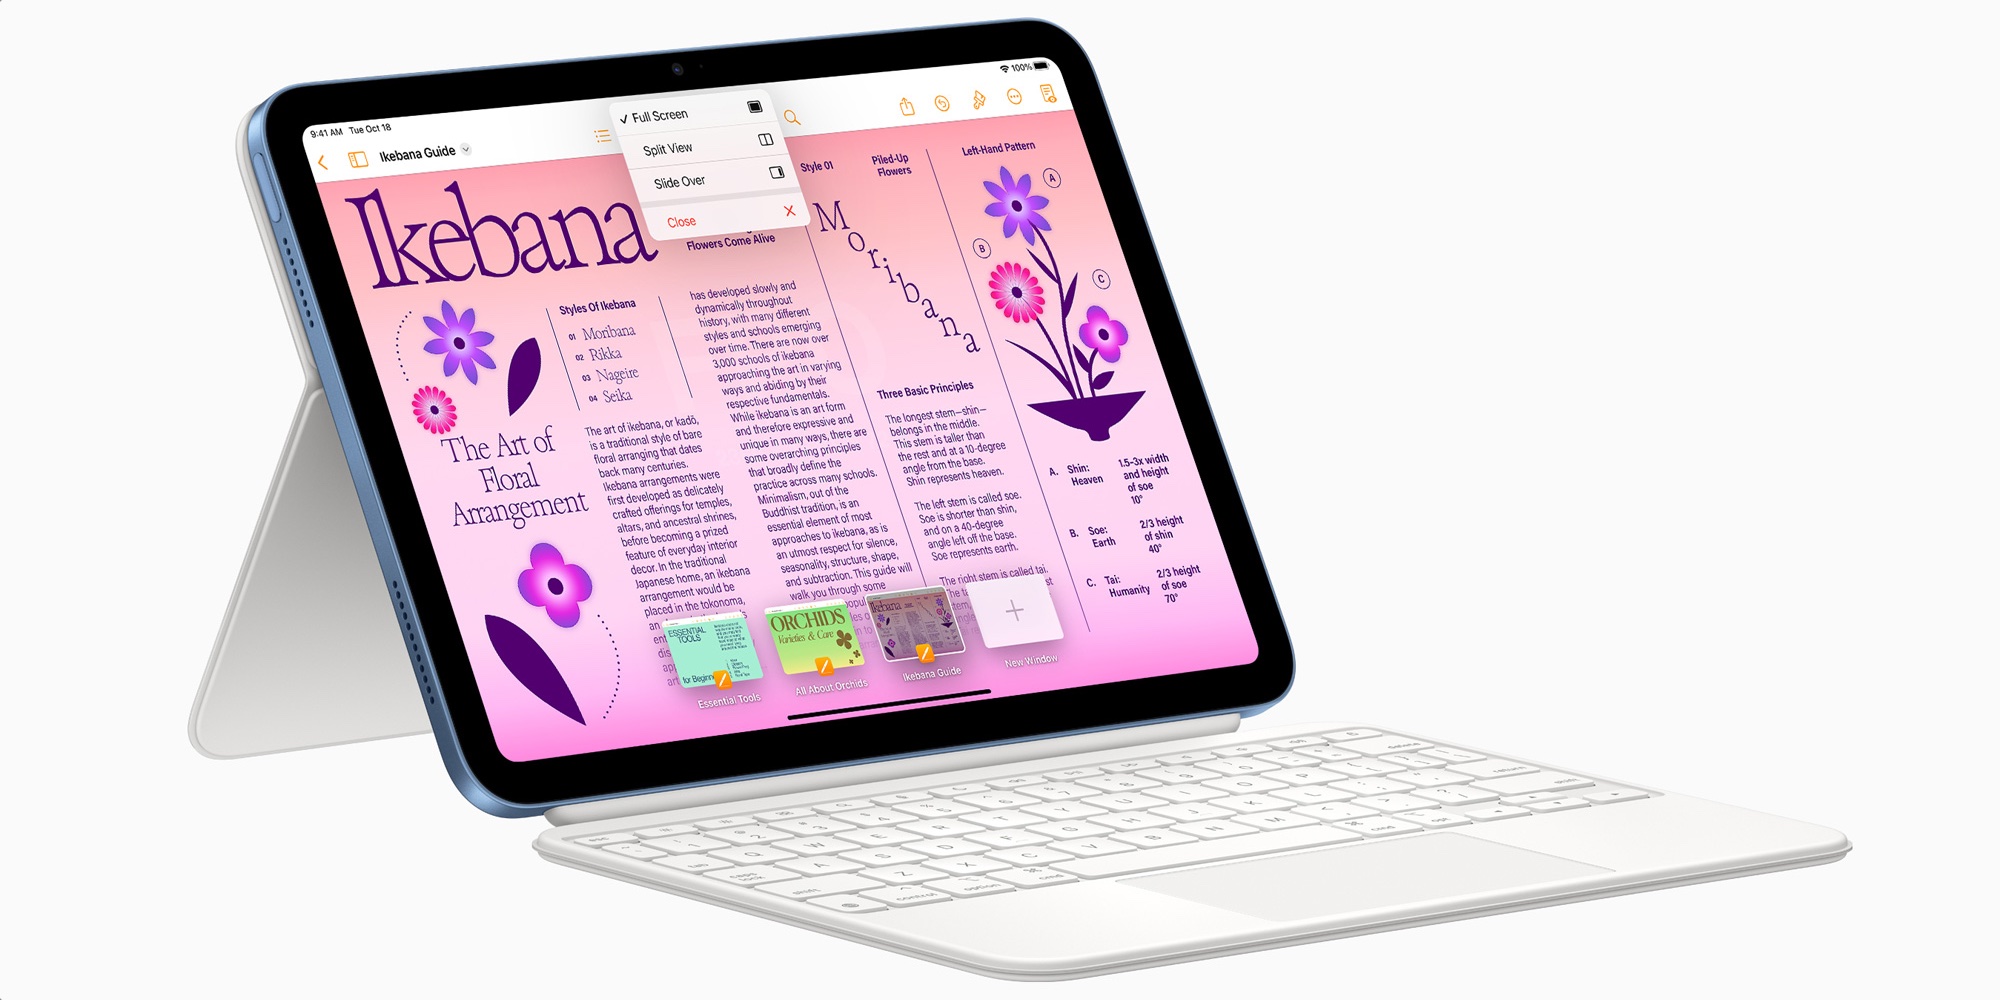 Apple considered launching a plastic iPad and keyboard for under $500